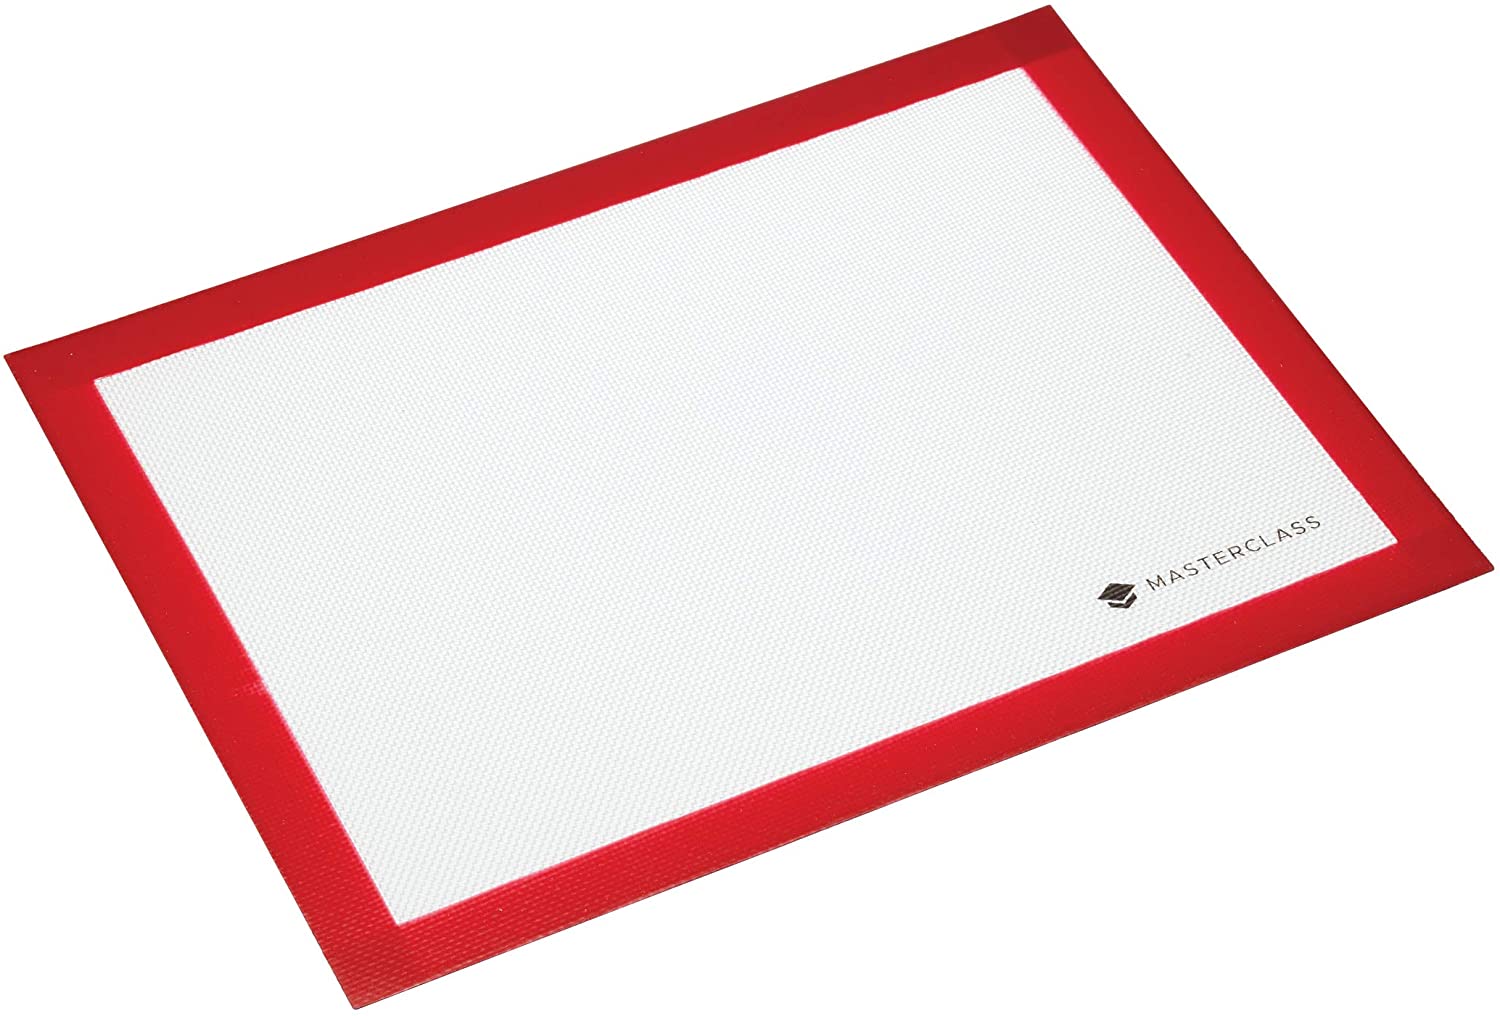 KitchenCraft MasterClaß Non-Stick Baking Tray/Dough Mat/Oven Mould Liner, Silicone, Red/White, 30 x 40 x 0.1 cm, 1 Unit